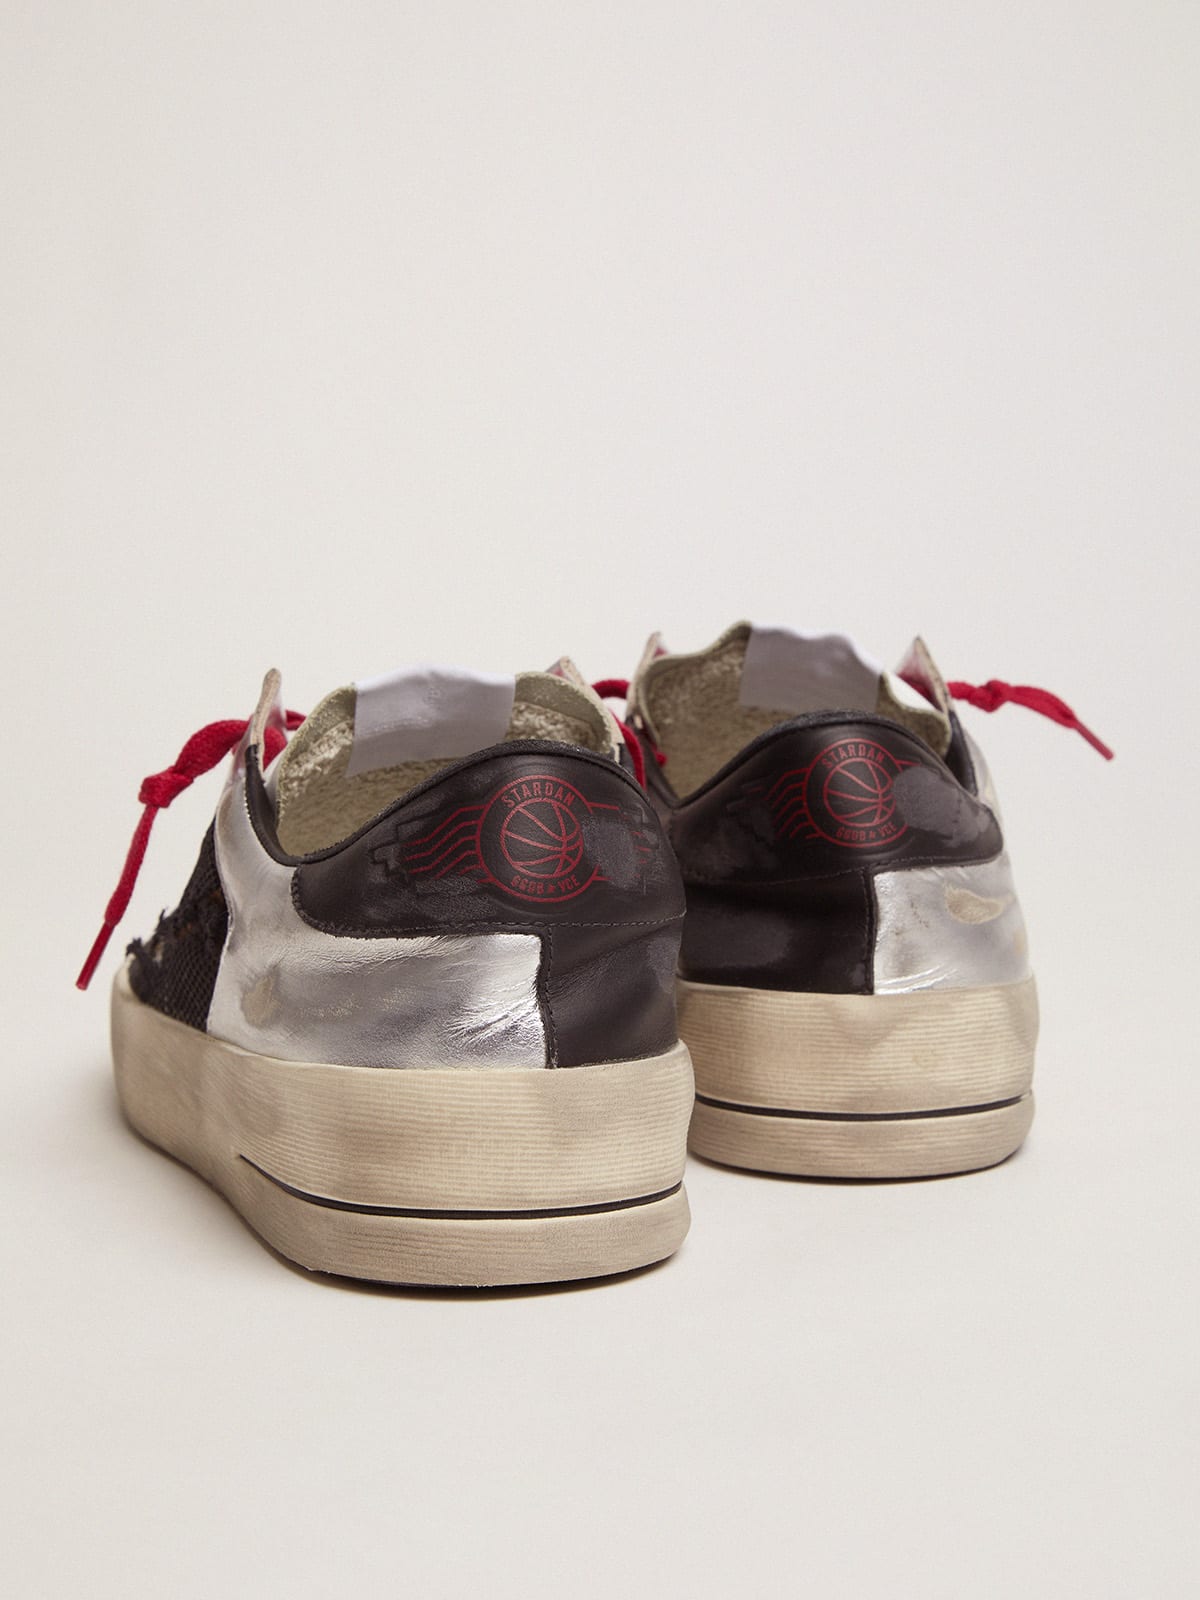 Golden Goose - Men's Limited Edition LAB silver and animal-print Stardan sneakers in 